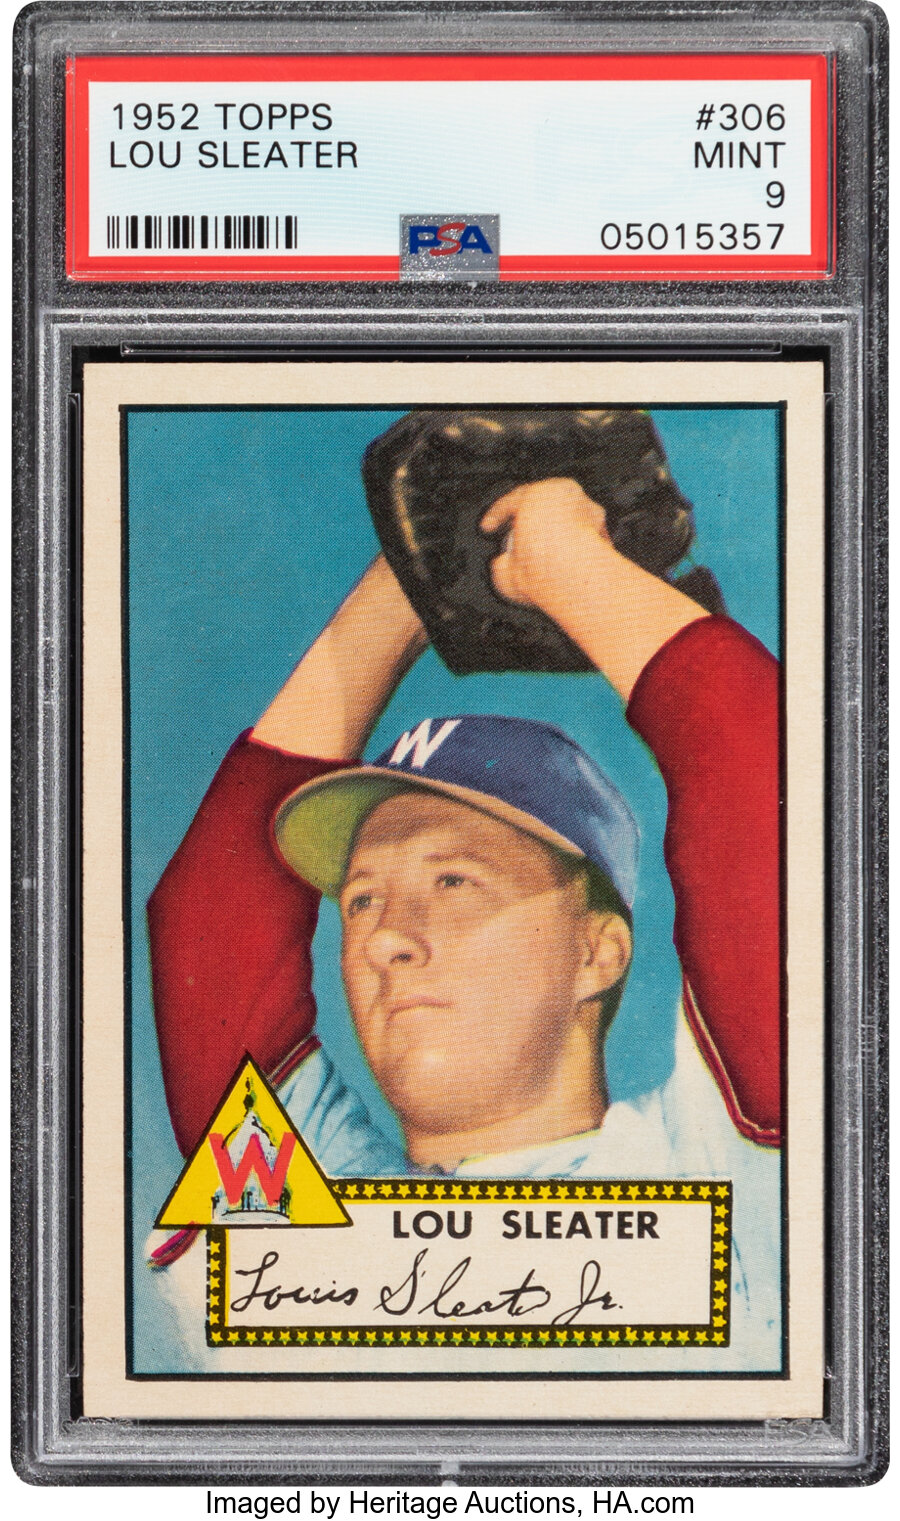 1952 Topps Lou Sleater #306 PSA Mint 9 - Pop Eight, One Higher!